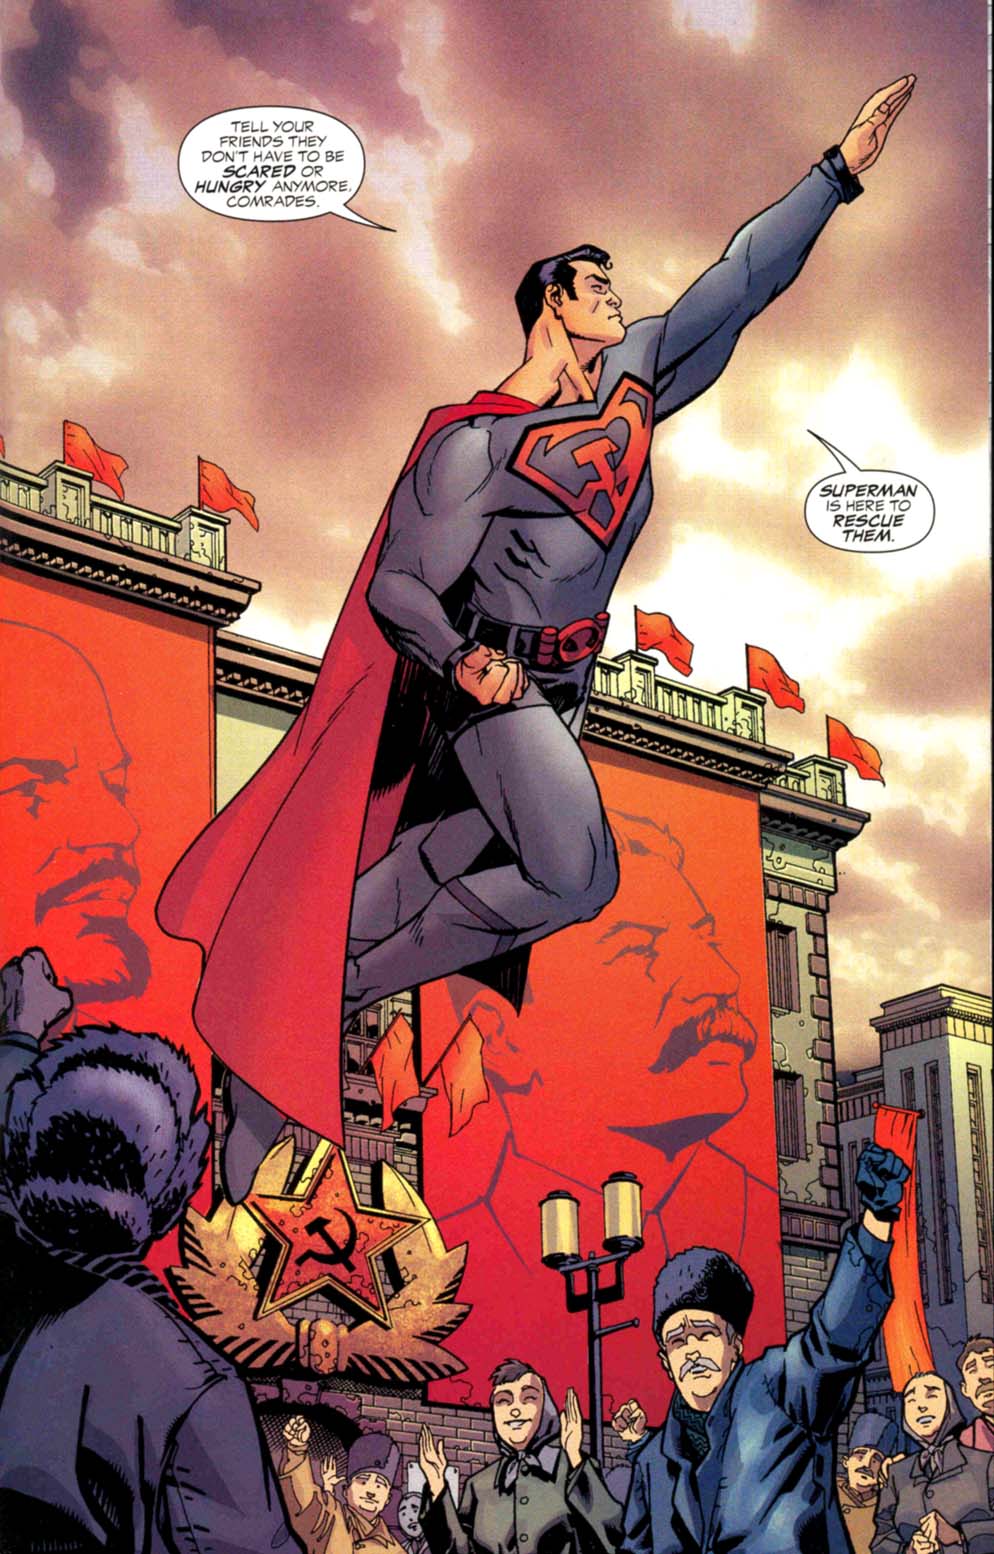 Superman Red Son issue 1 ending